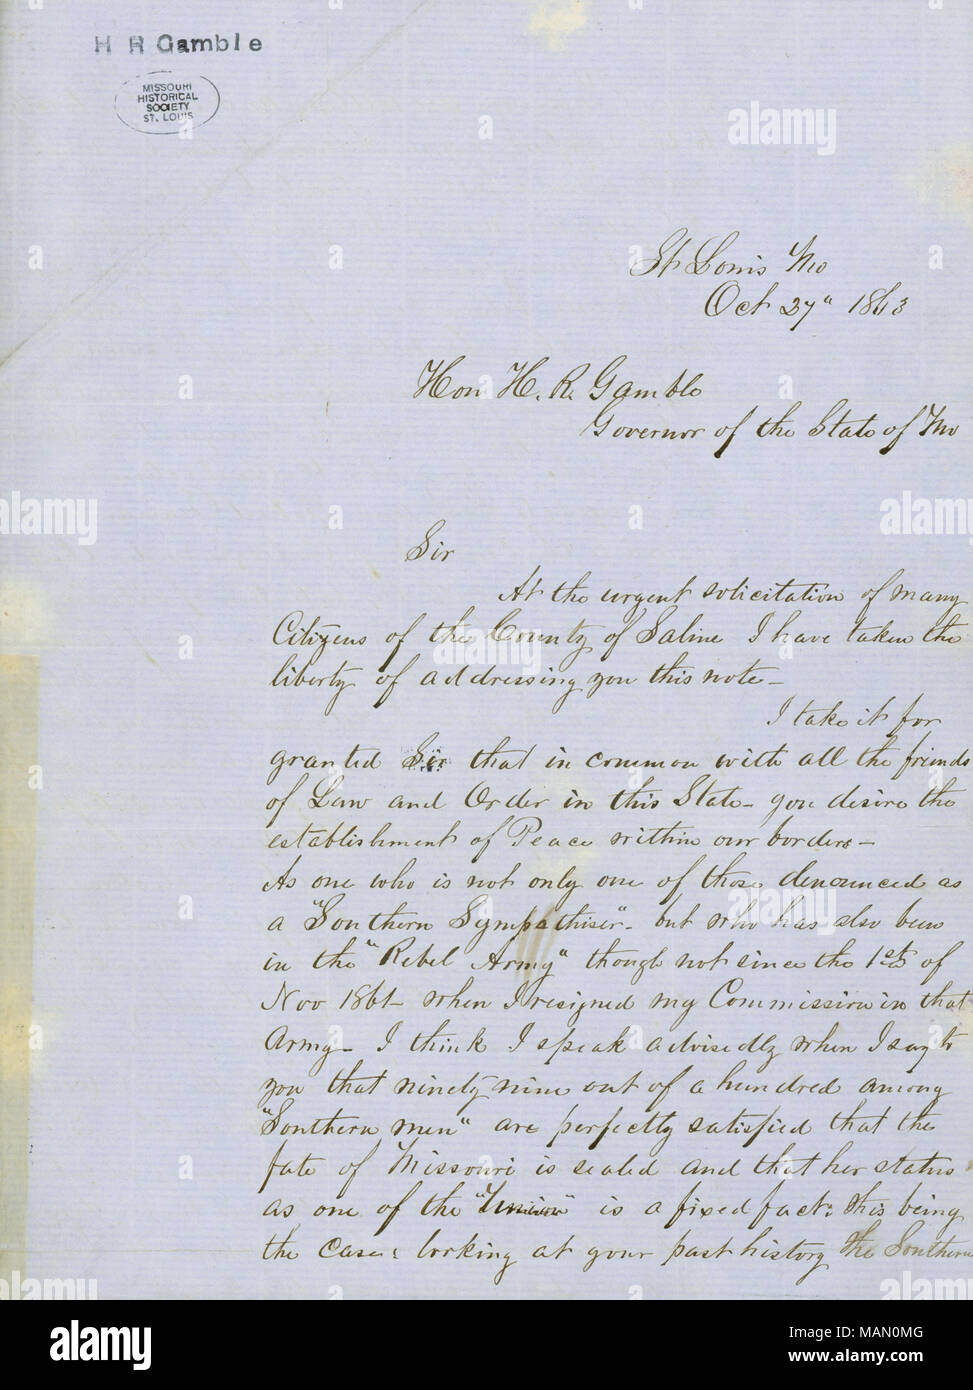 Complains about abuses by militia troops and requests help in allowing full and open election in Saline County. Title: Letter signed John Sheridan, St. Louis, Mo., to Hon. H.R. Gamble, Governor of the State of Mo., October 27, 1863  . 27 October 1863. Sheridan, John Stock Photo